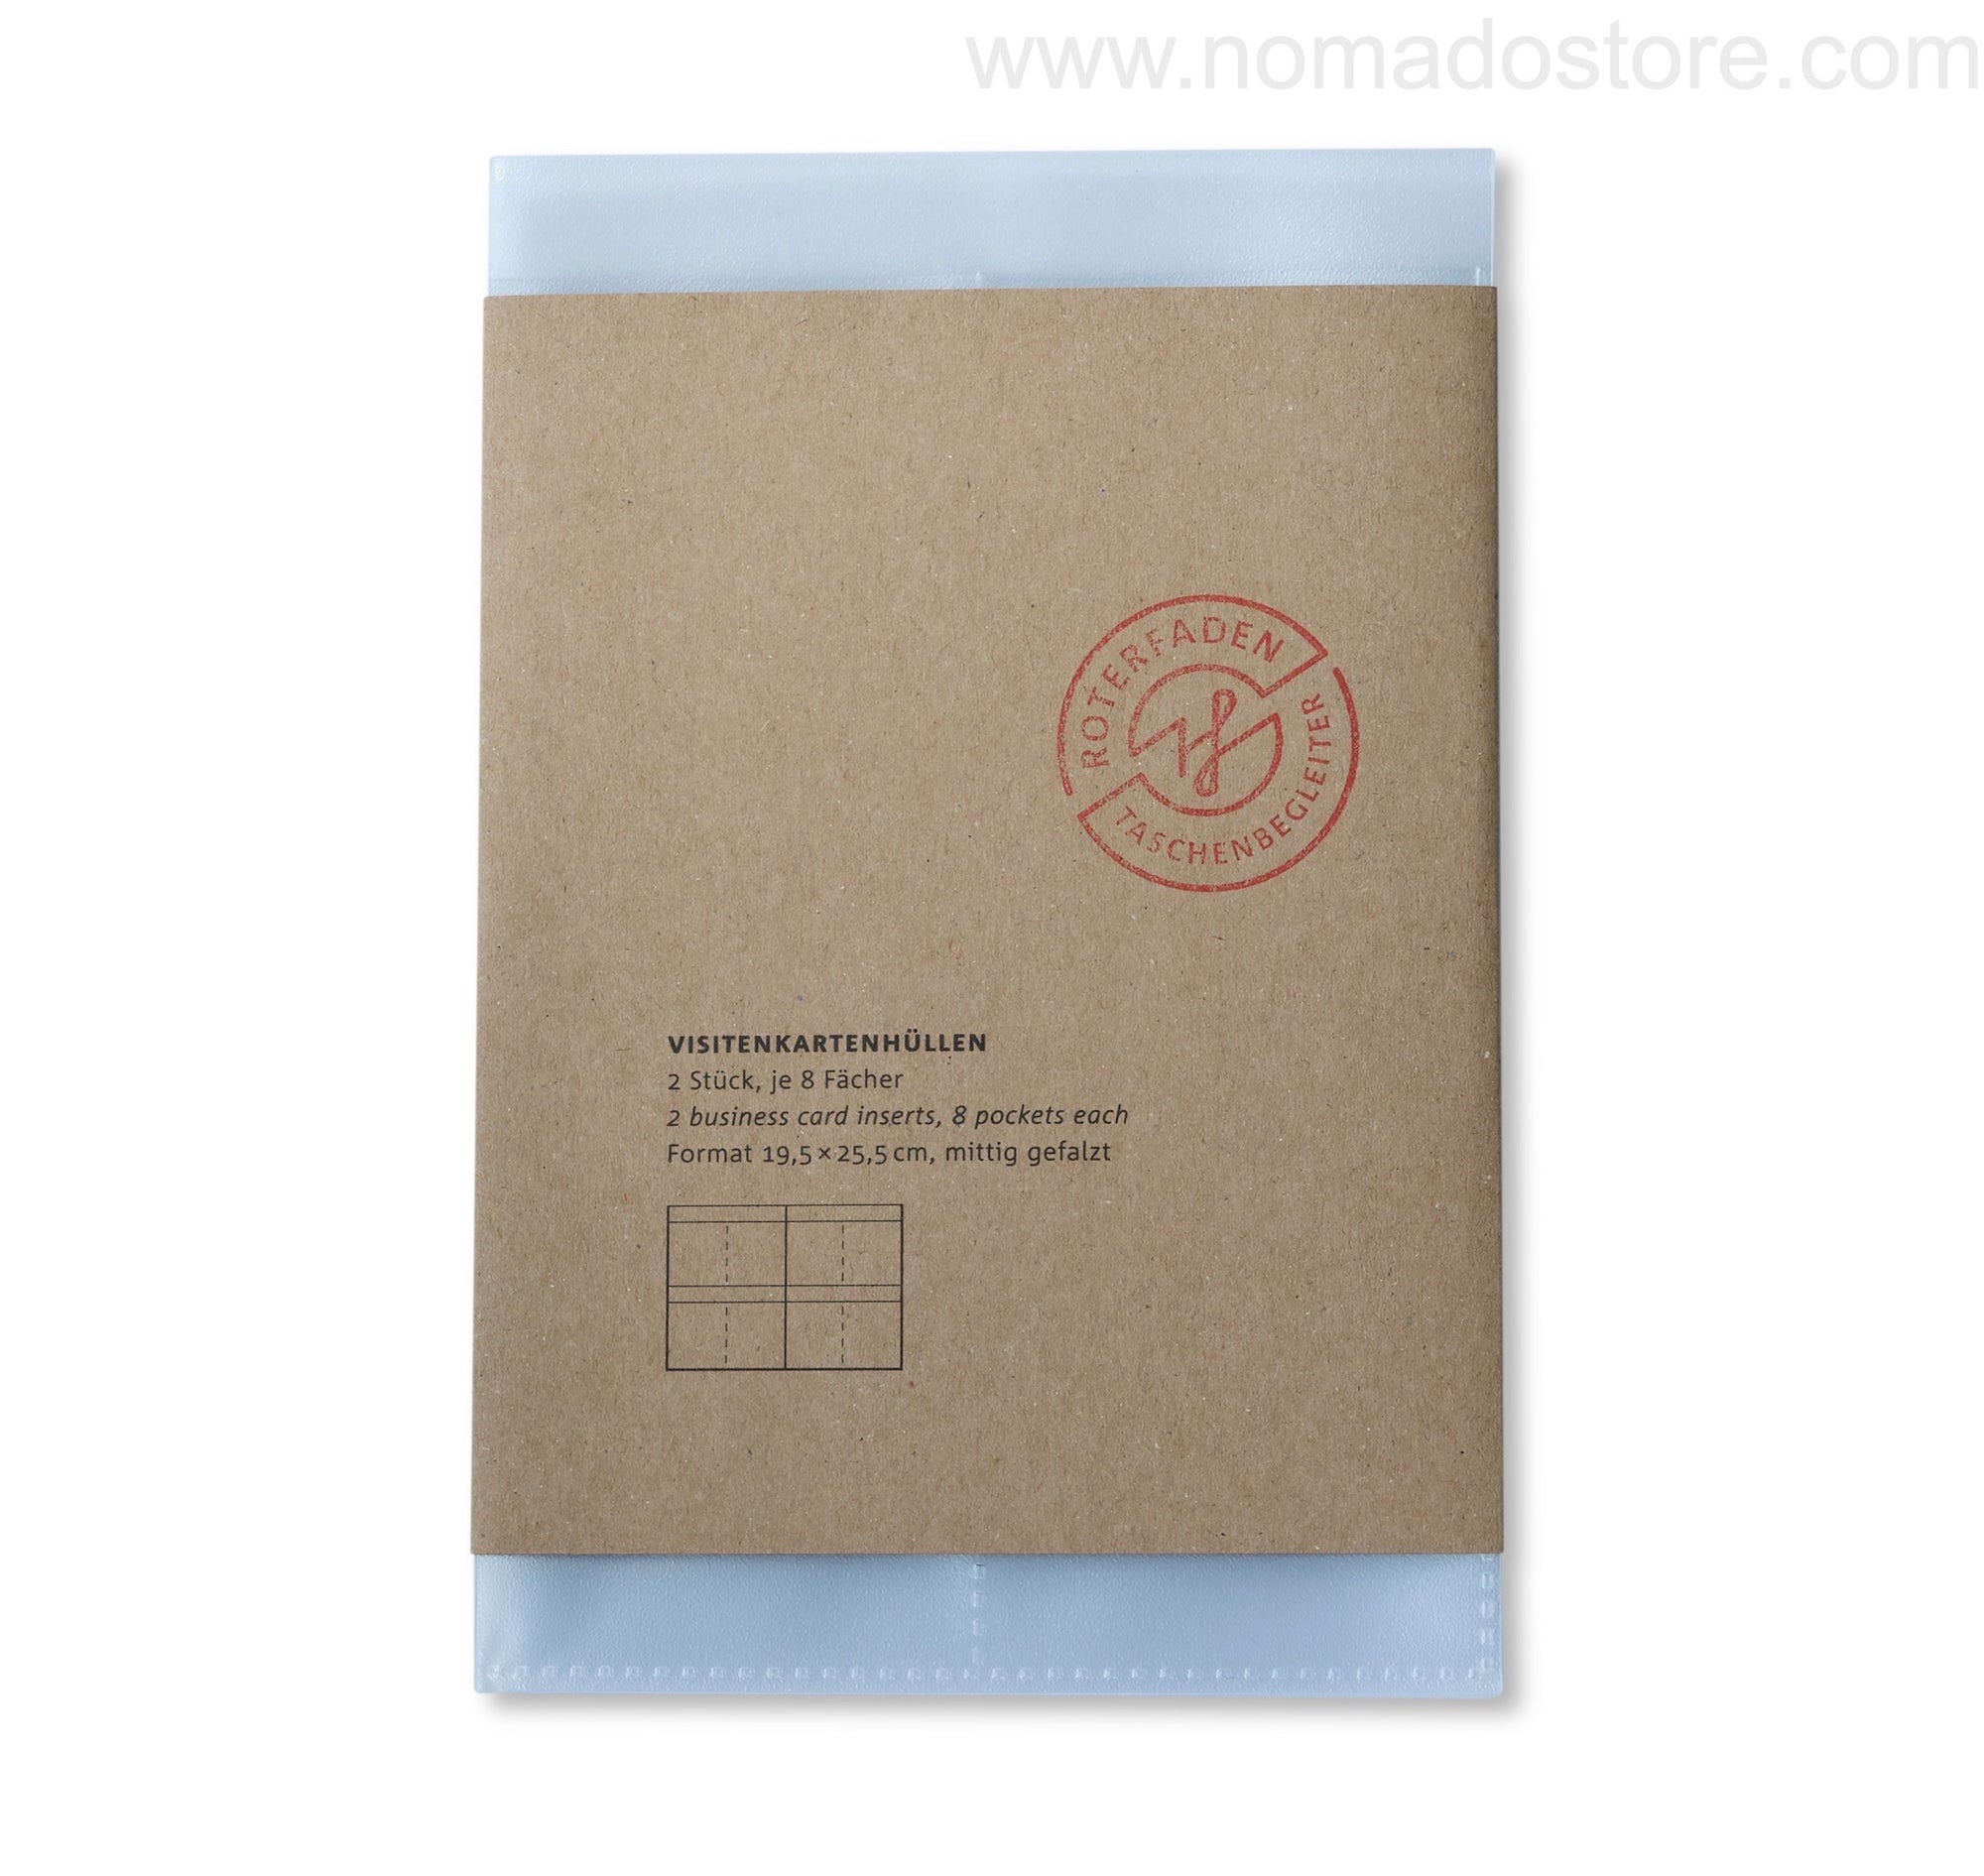 Roterfaden Business Card Protectors (2x) - NOMADO Store 